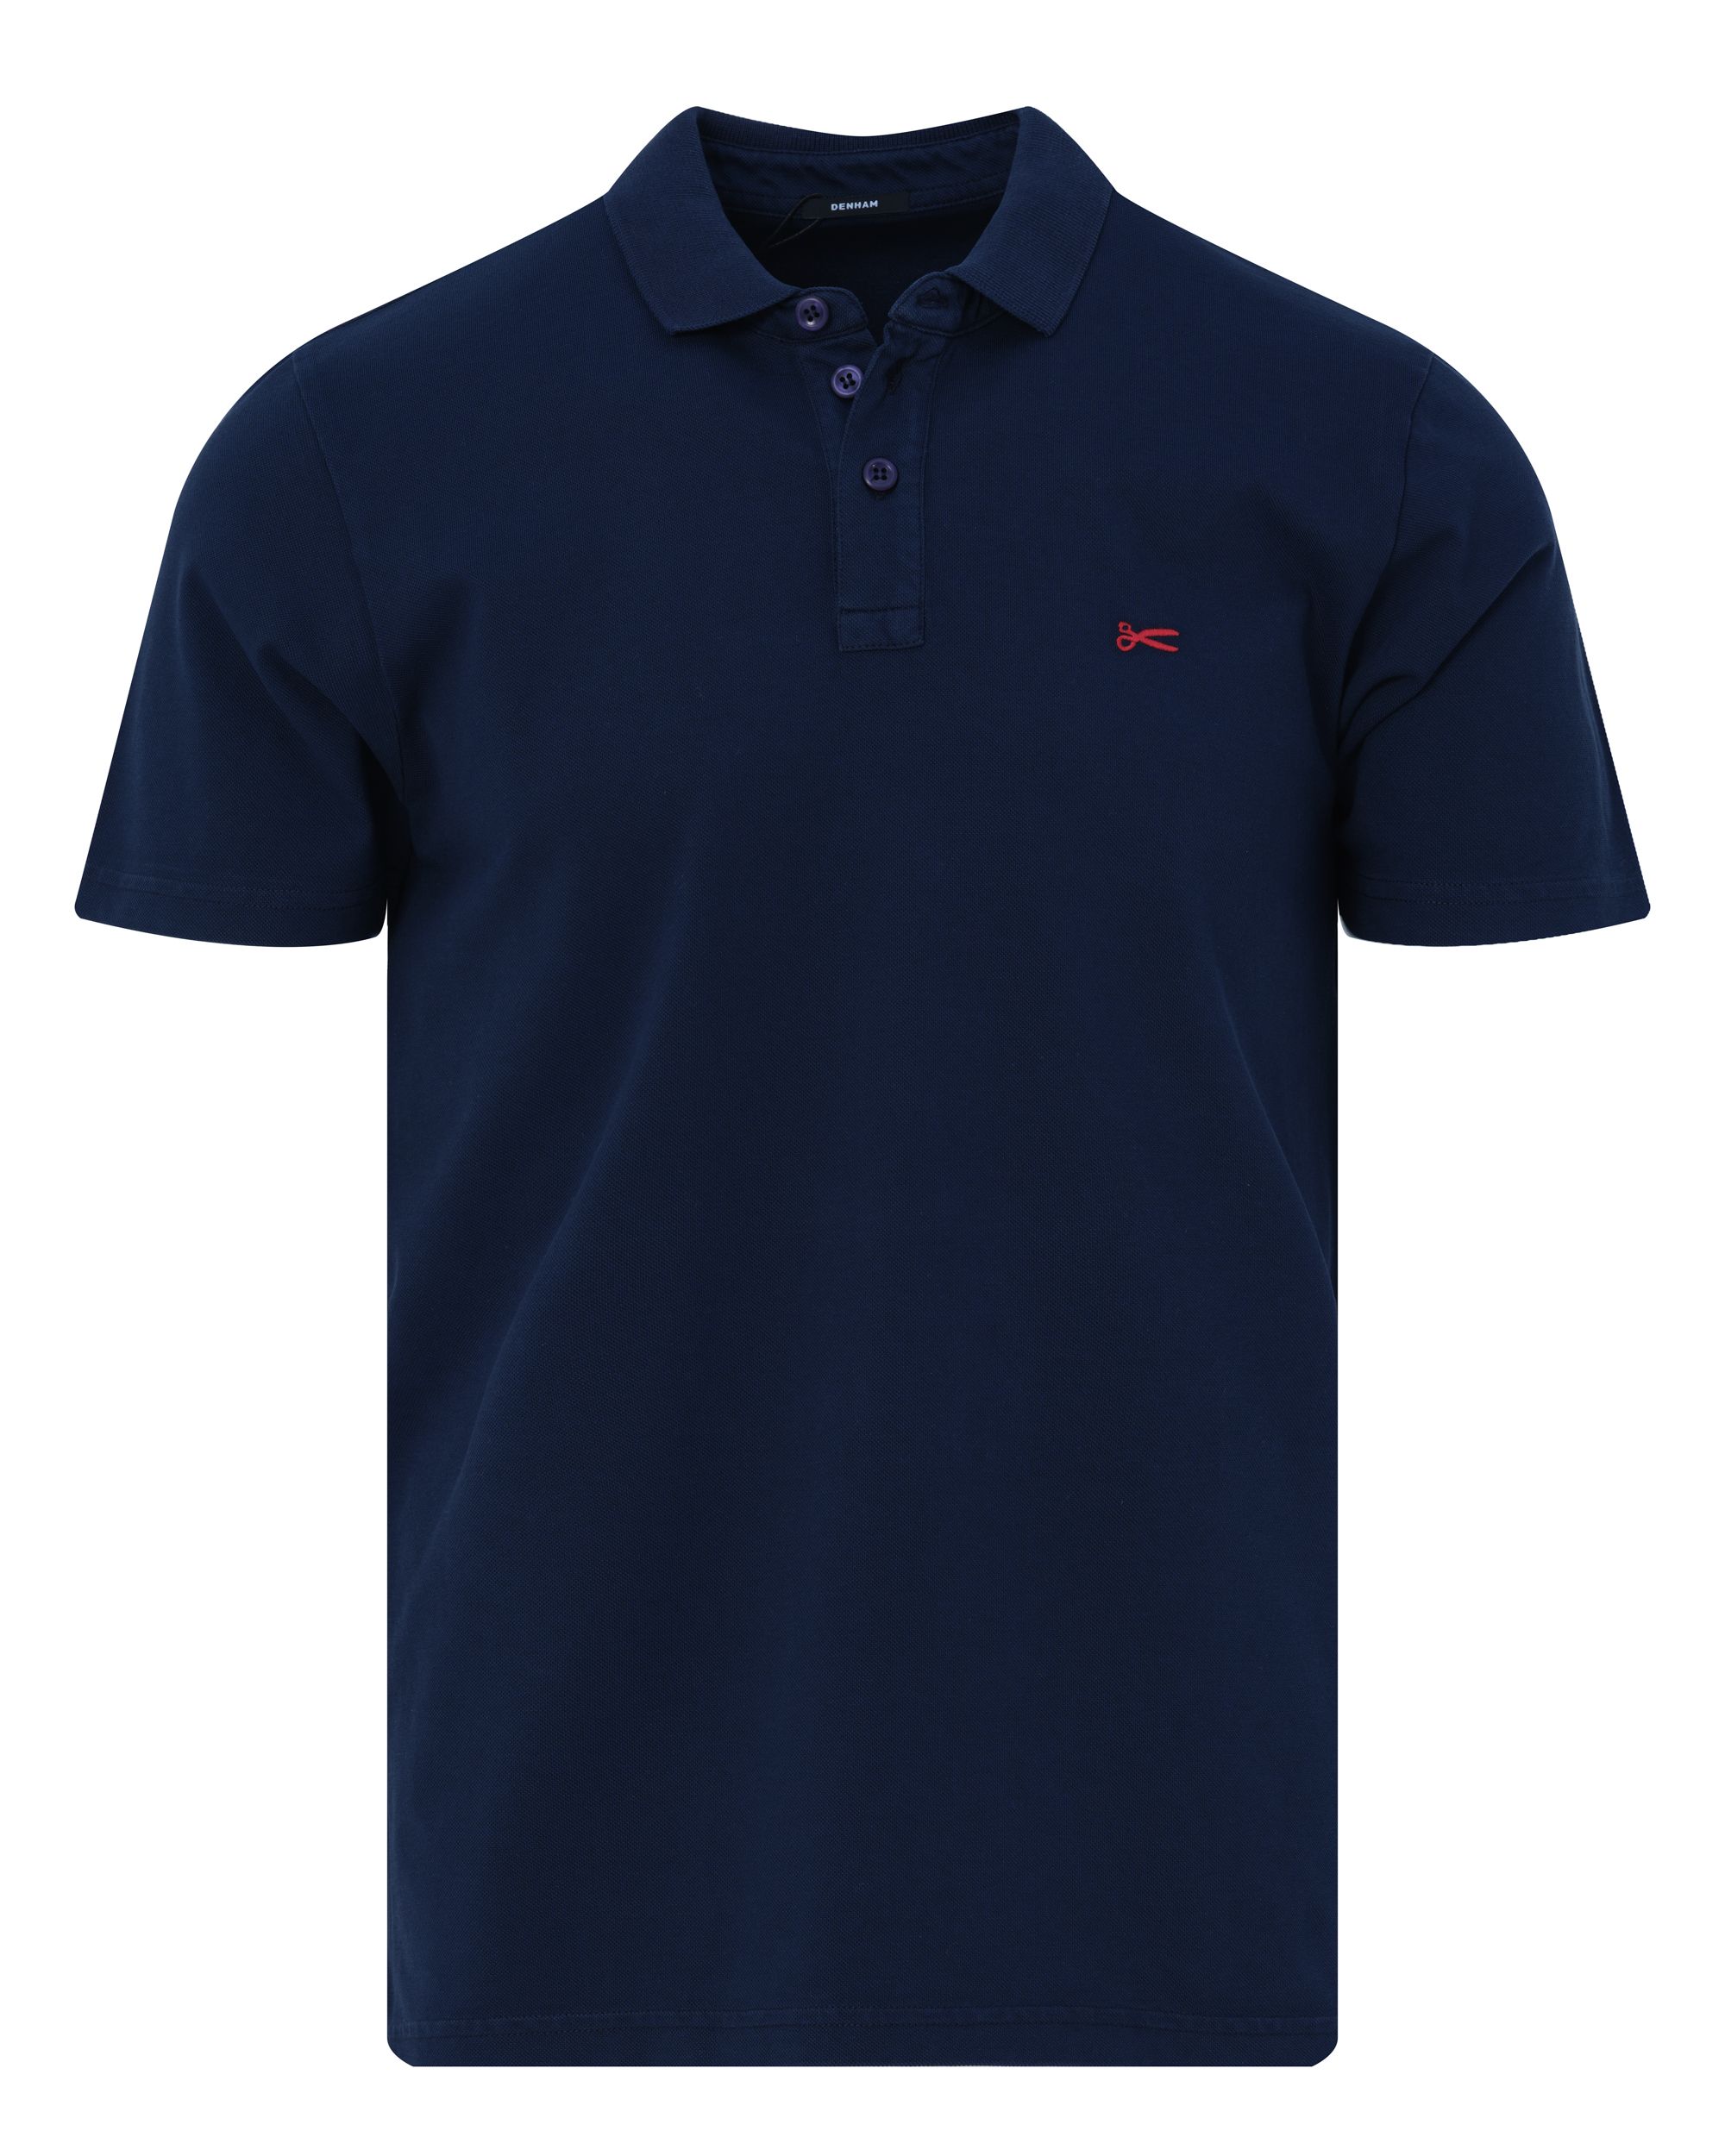 Lupo Polo KM | nu - Only for